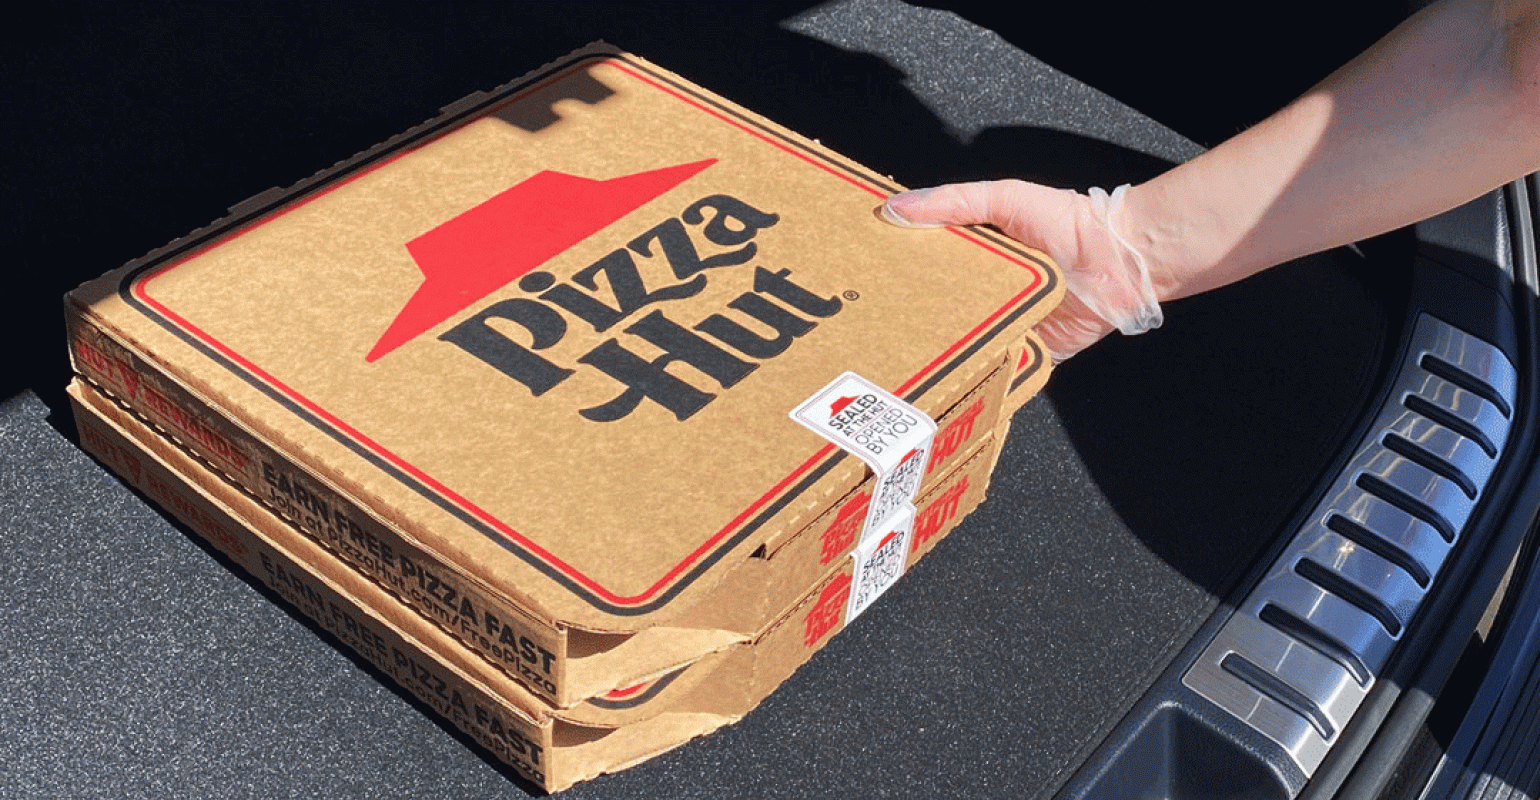 https://www.nrn.com/sites/nrn.com/files/styles/article_featured_retina/public/Pizzahut-Contactless_Curbside_Pickup.gif?itok=86XVhbaA